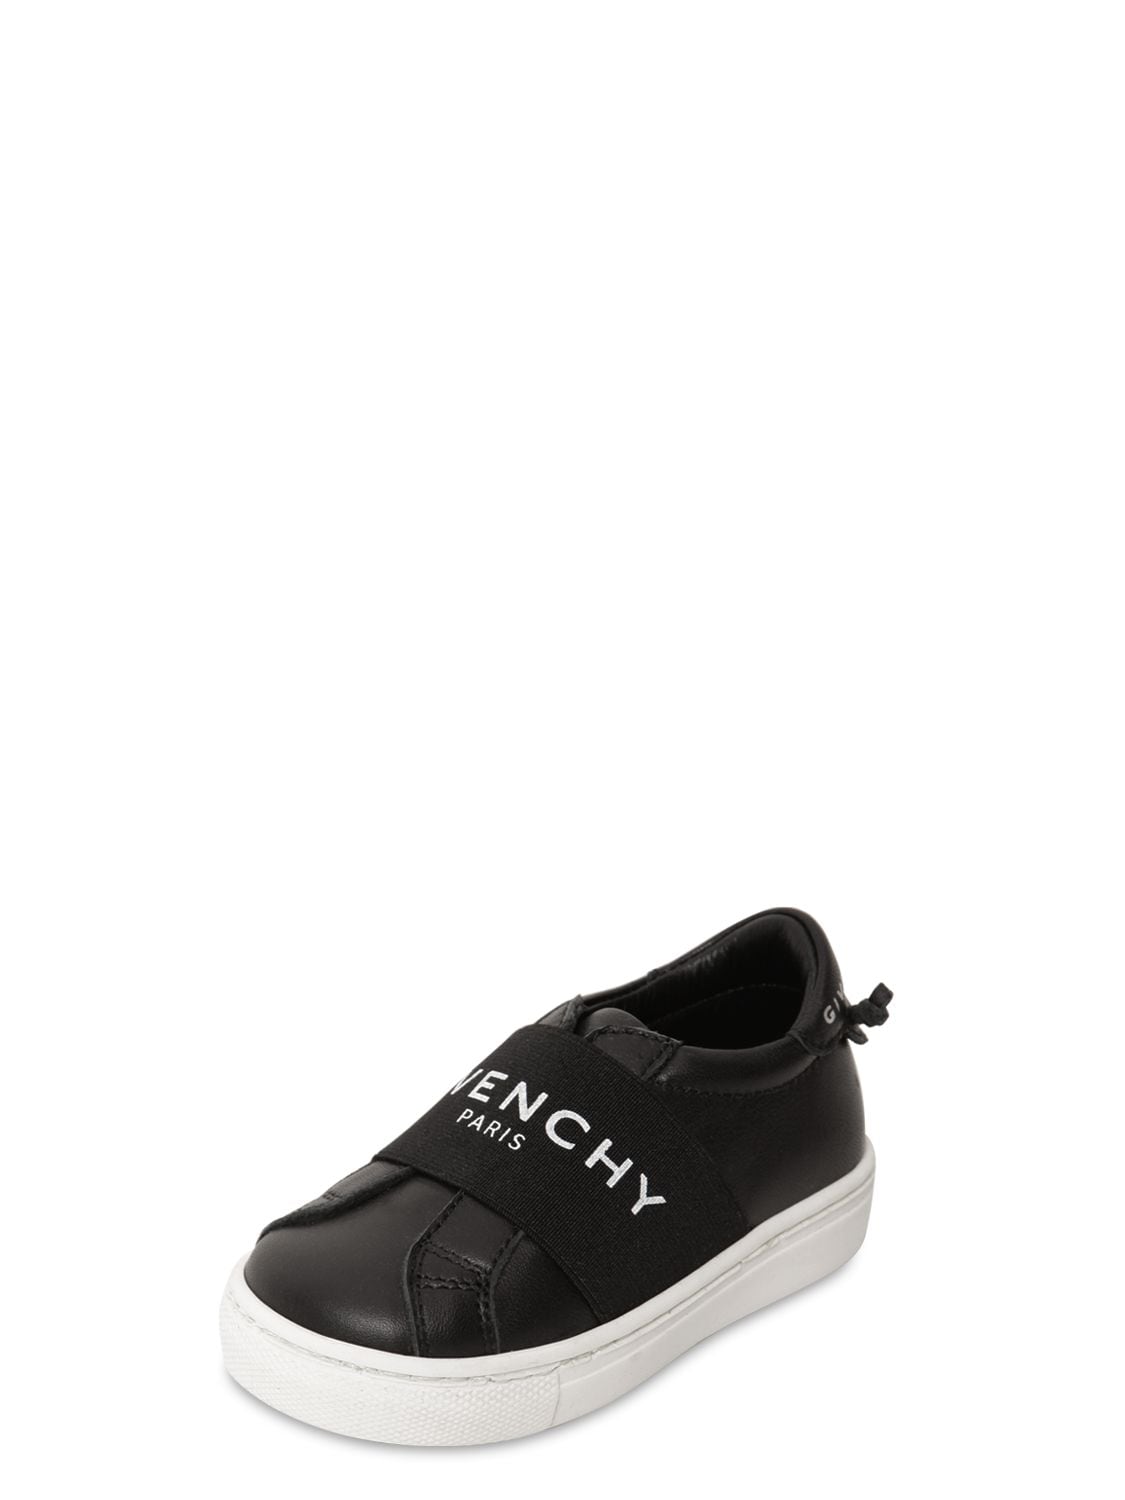 GIVENCHY SLIP-ON LEATHER SNEAKERS W/ LOGO STRAP,70IOFL085-MDLC0